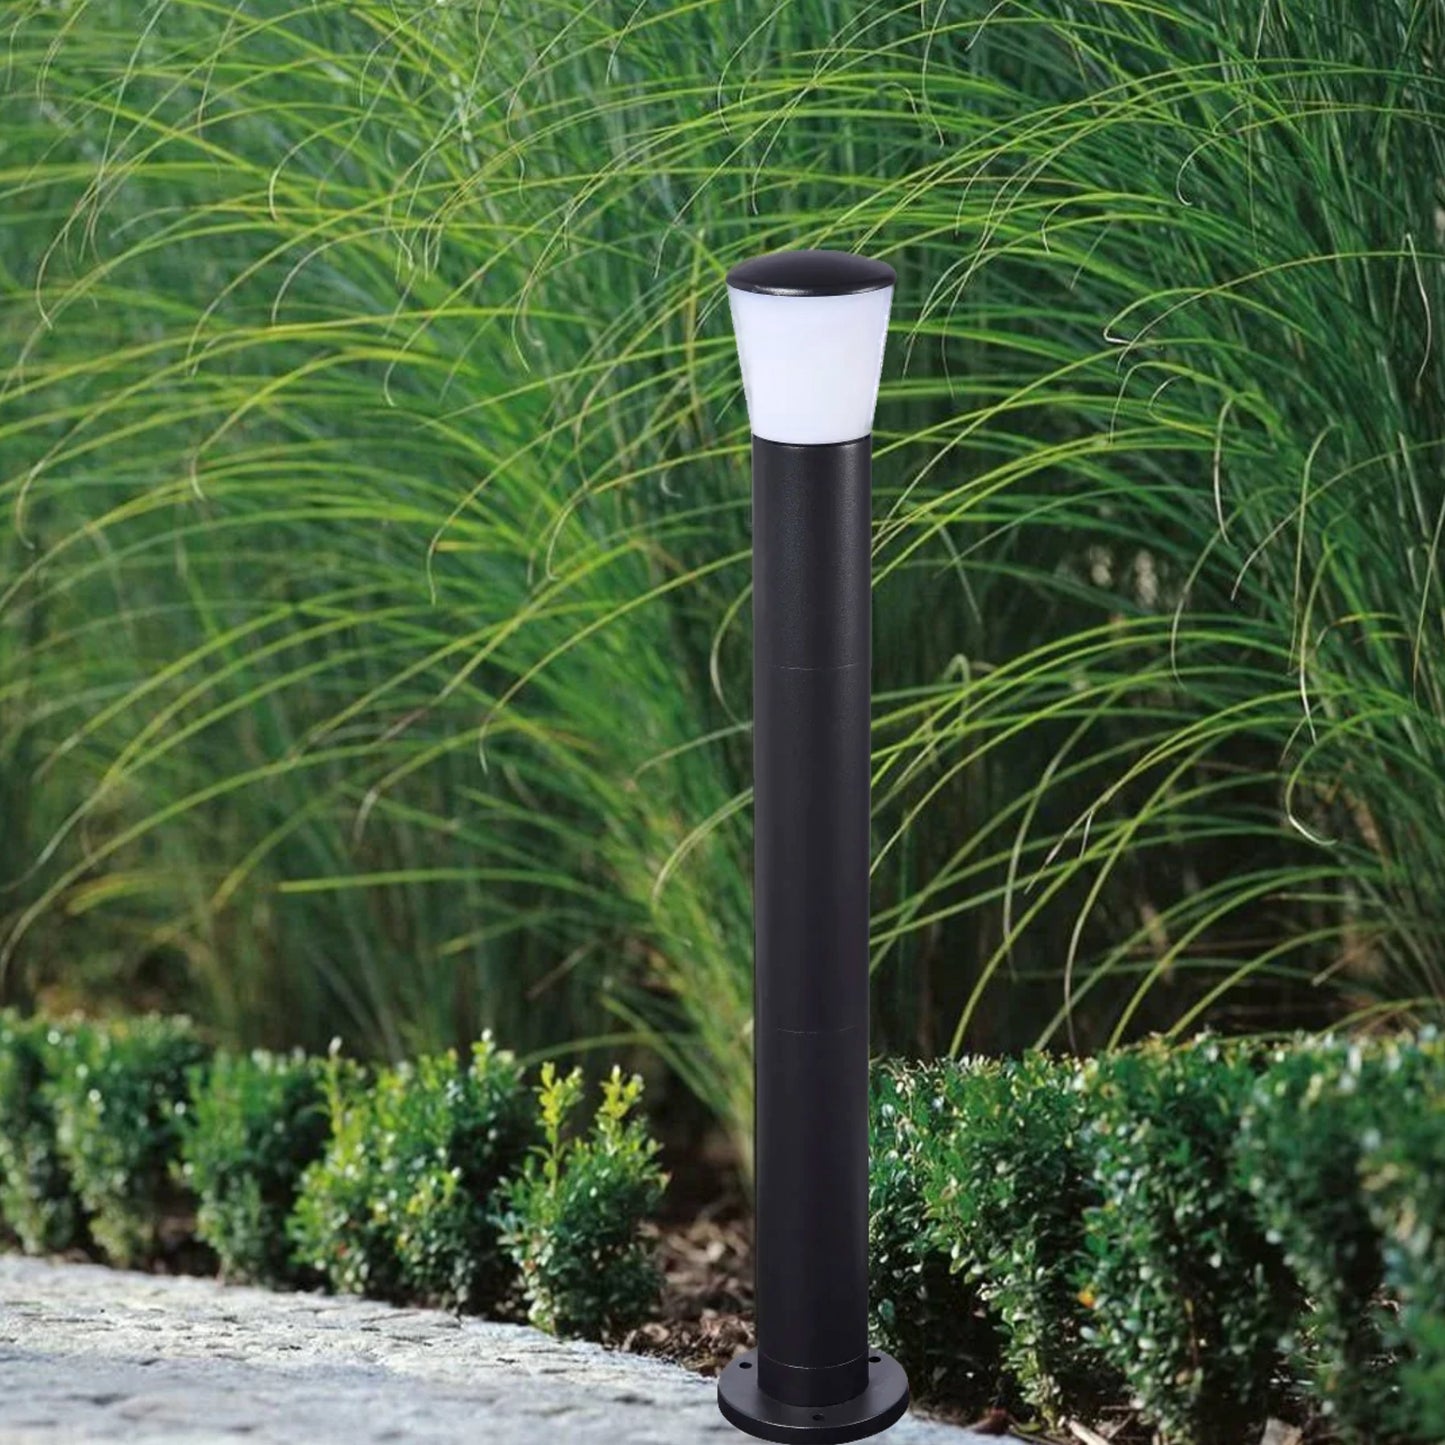 Our Otis black outdoor post light would look perfect in a modern or more traditional home design. Outside post lights can provide atmospheric light in your garden, at the front door or on the terrace as well as a great security solution. It is designed for durability and longevity with its robust material producing a fully weatherproof and water resistant light fitting